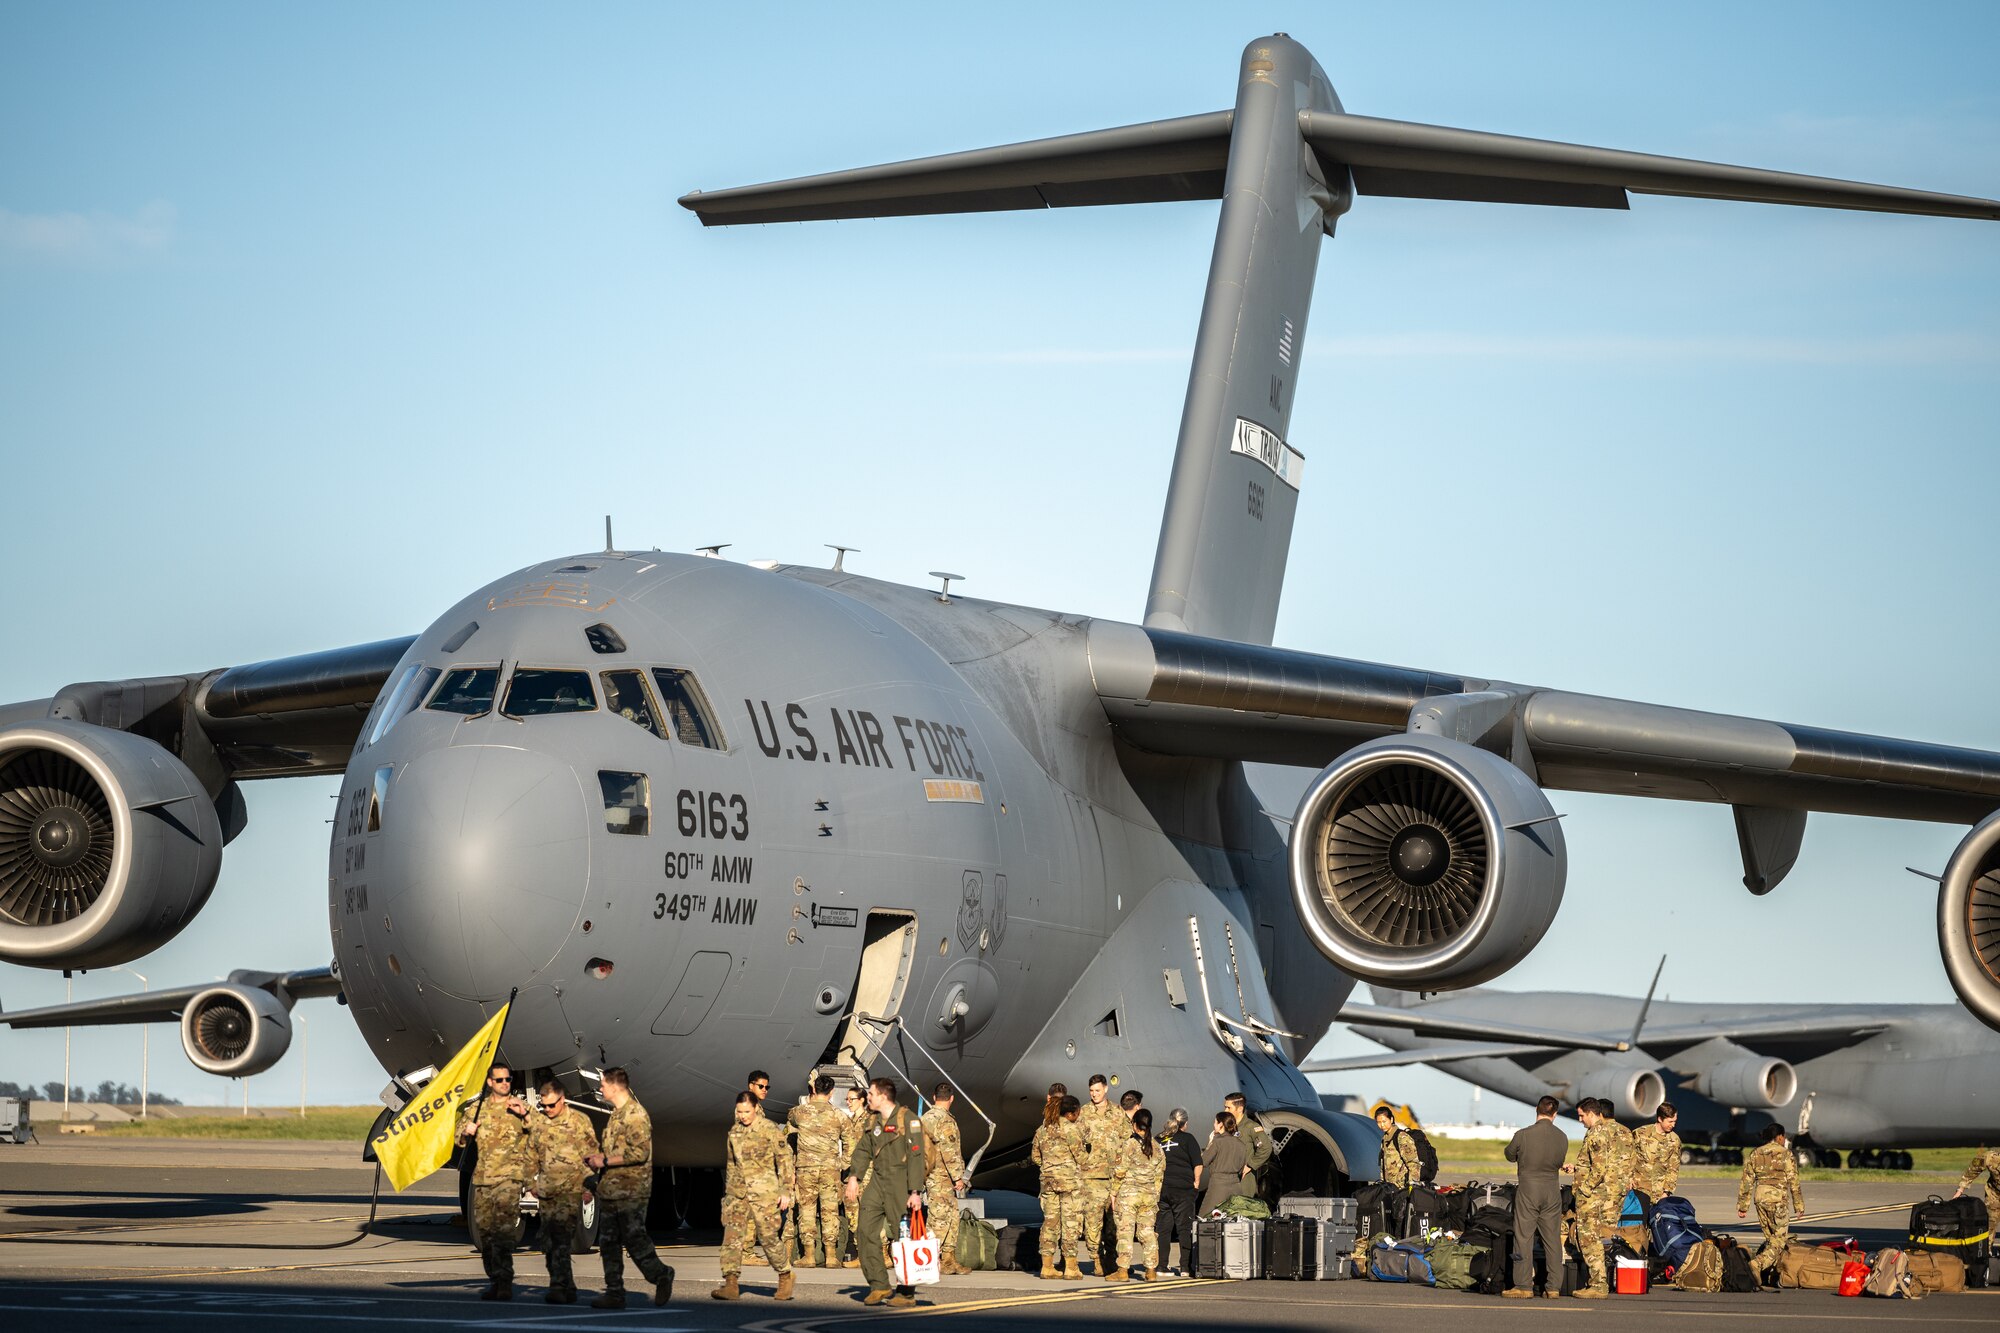 A group of Airmen greet and unload equipment from a C-17 Globemaster III after a deployment